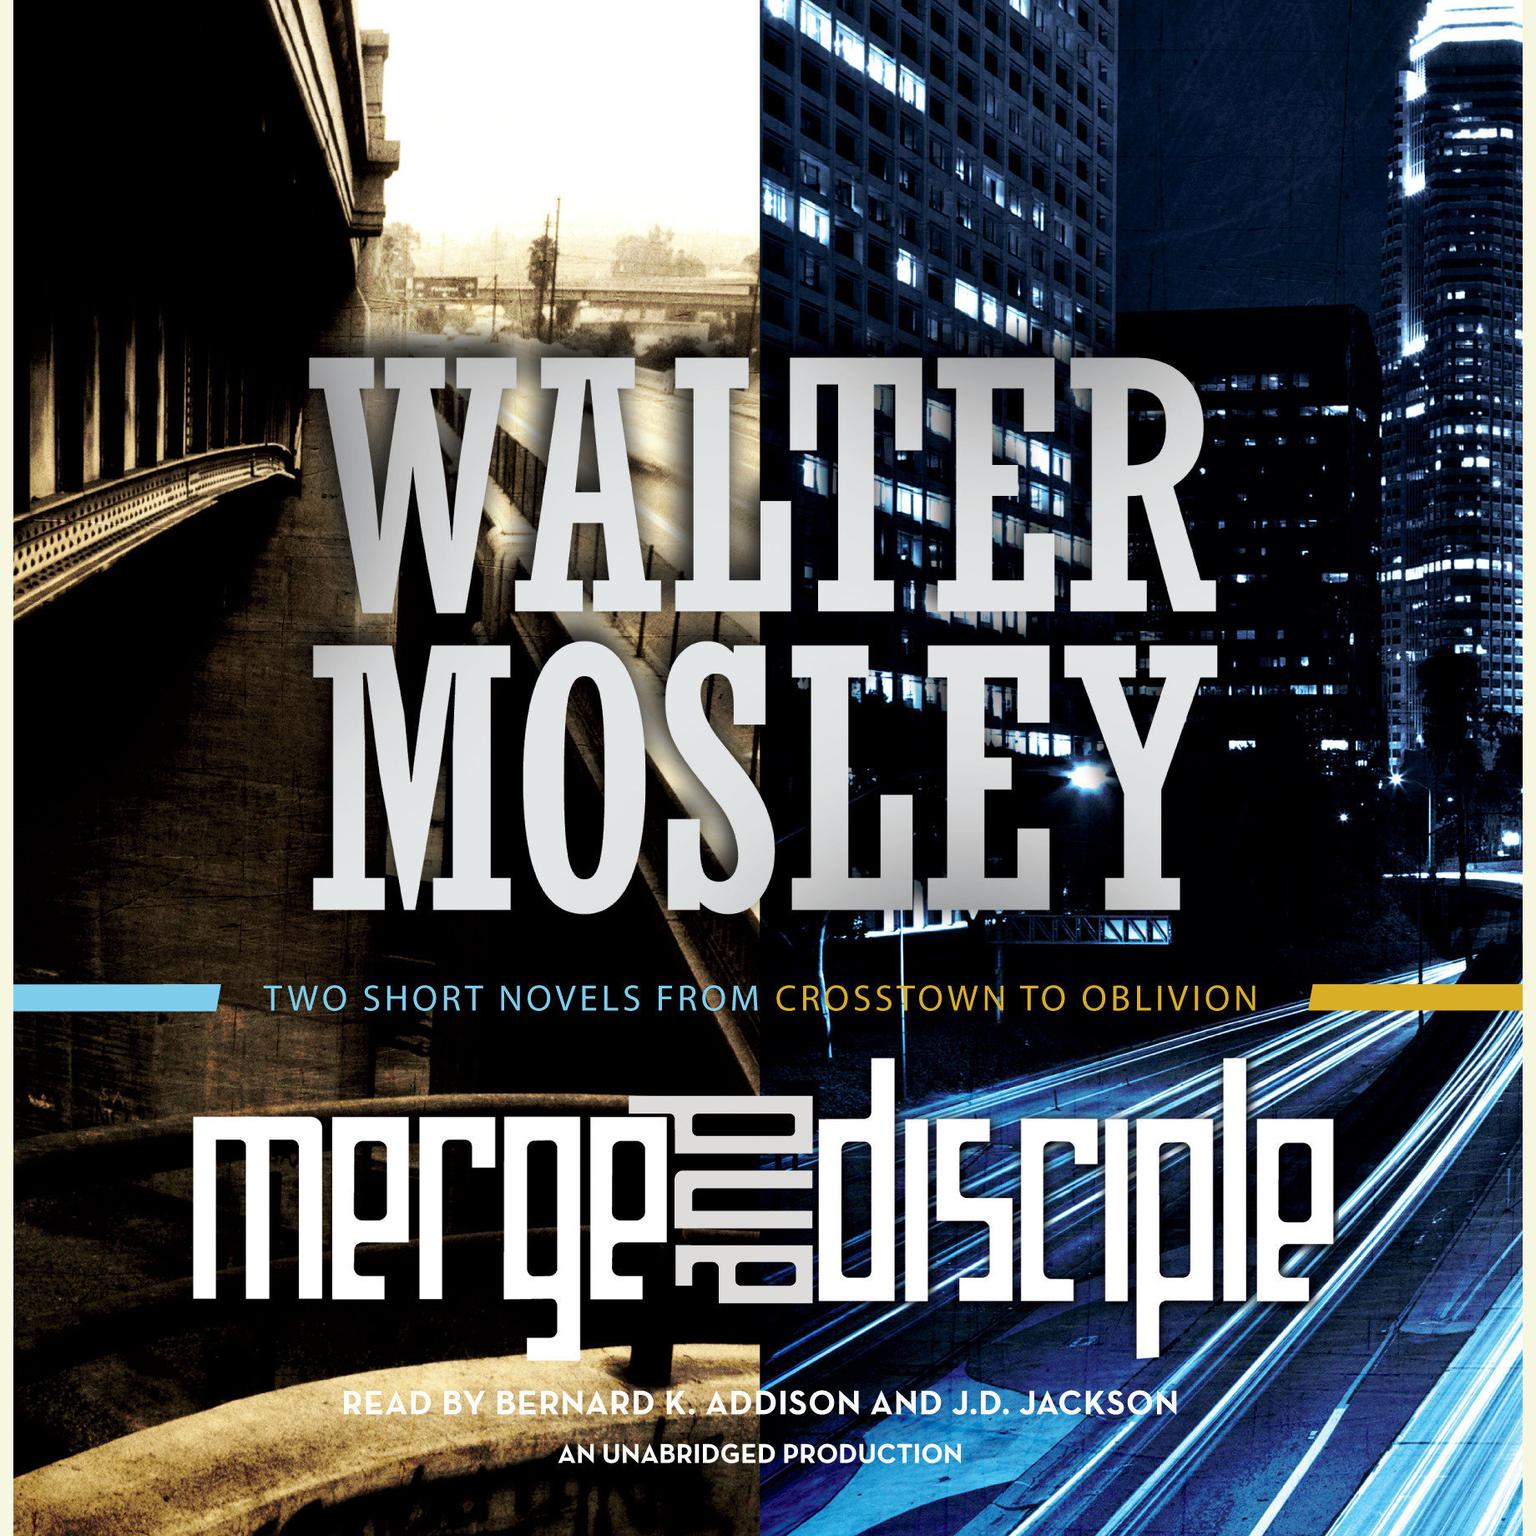 Merge / Disciple: Two Short Novels from Crosstown to Oblivion Audiobook, by Walter Mosley